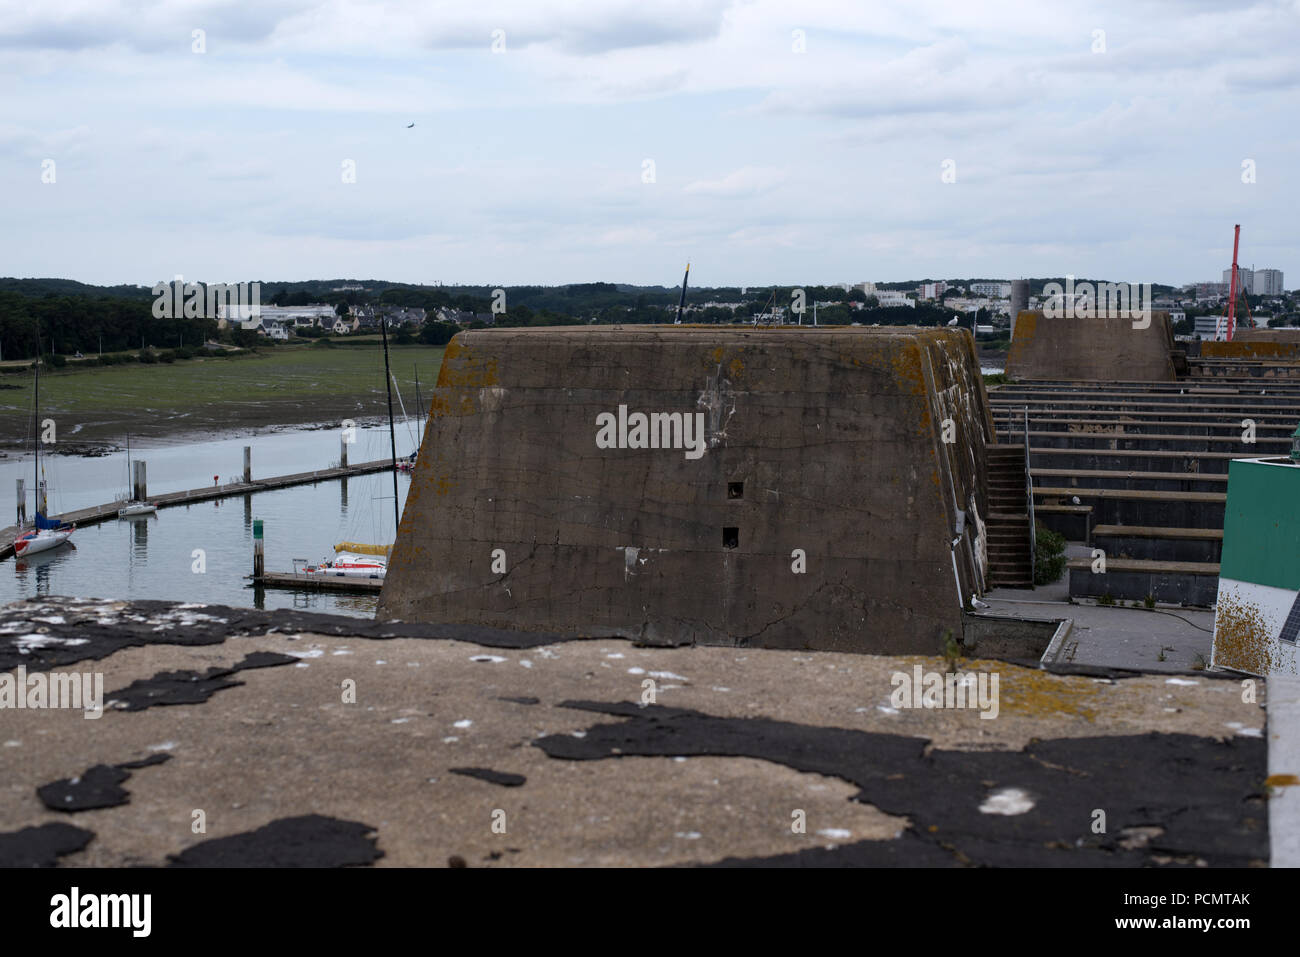 19.07.2018, France, Brittany, Lorient: The roof of the former German submarine bunker Keroman 3. The submarine bunkers in Lorient were built during the Second World War on behalf of the Wehrmacht under the direction of the organization Todt (OT). Photo: Ralf Hirschberger / dpa | usage worldwide Stock Photo